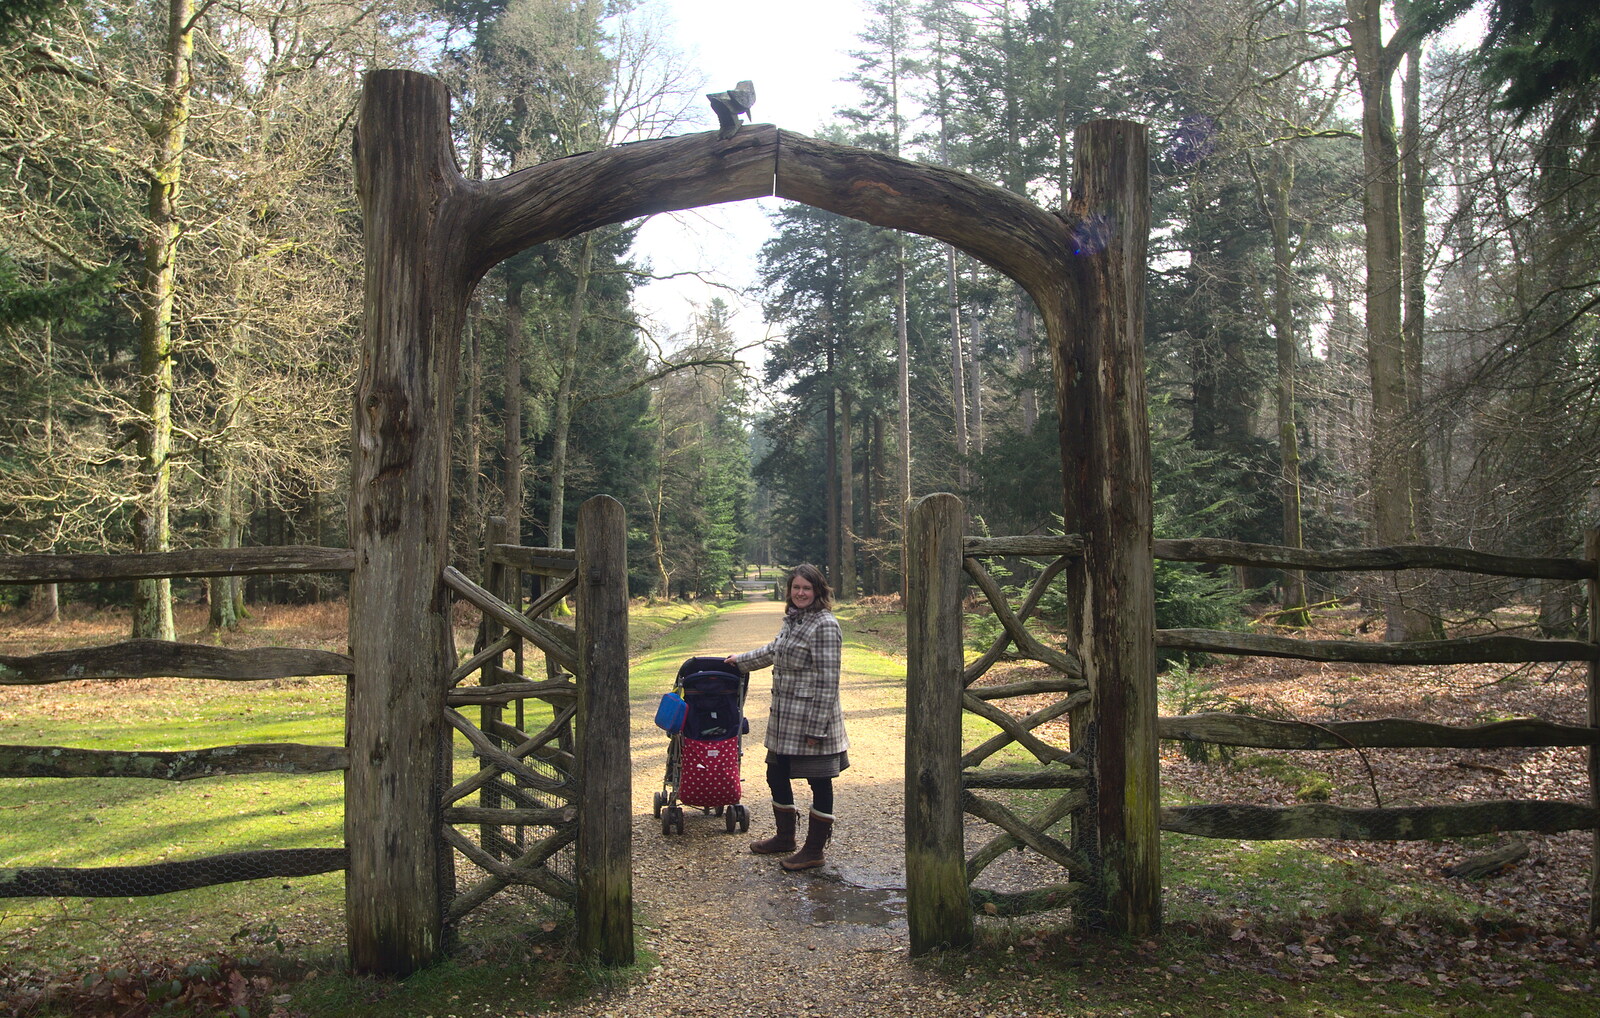 Isobel pauses by a wooden gate from The Ornamental Drive, Rhinefield, New Forest - 20th March 2013